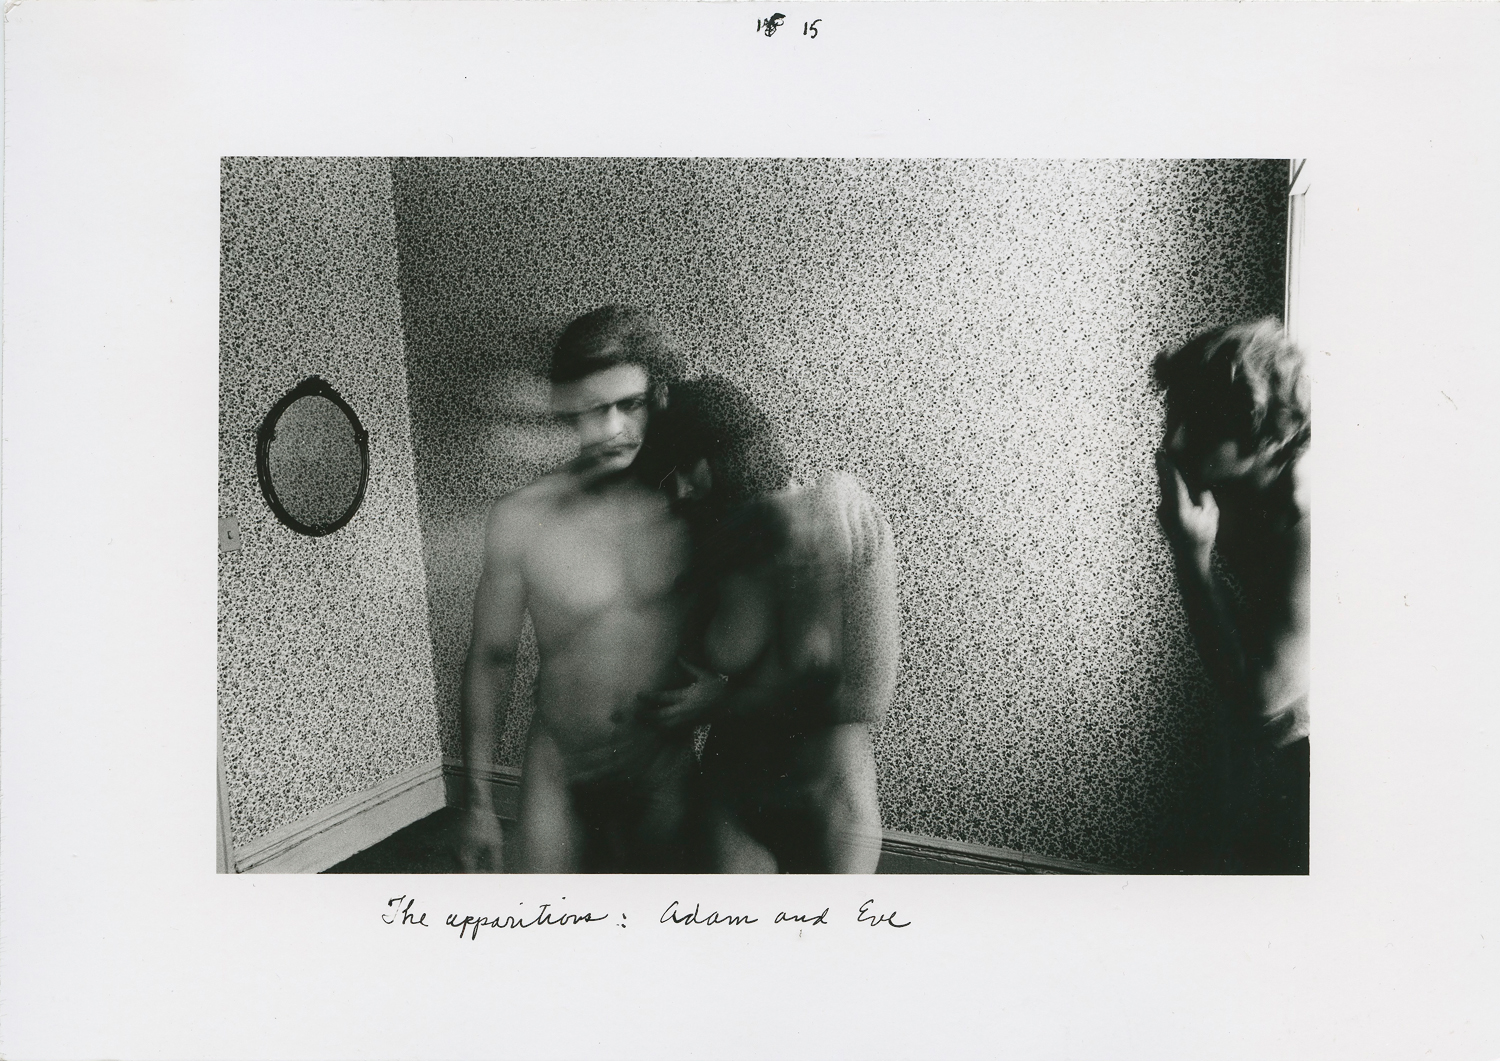 Duane Michals, The Journey of the Spirit After Death (detail), 1971. Gelatin silver print. © Duane Michals. Courtesy of DC Moore Gallery, New York